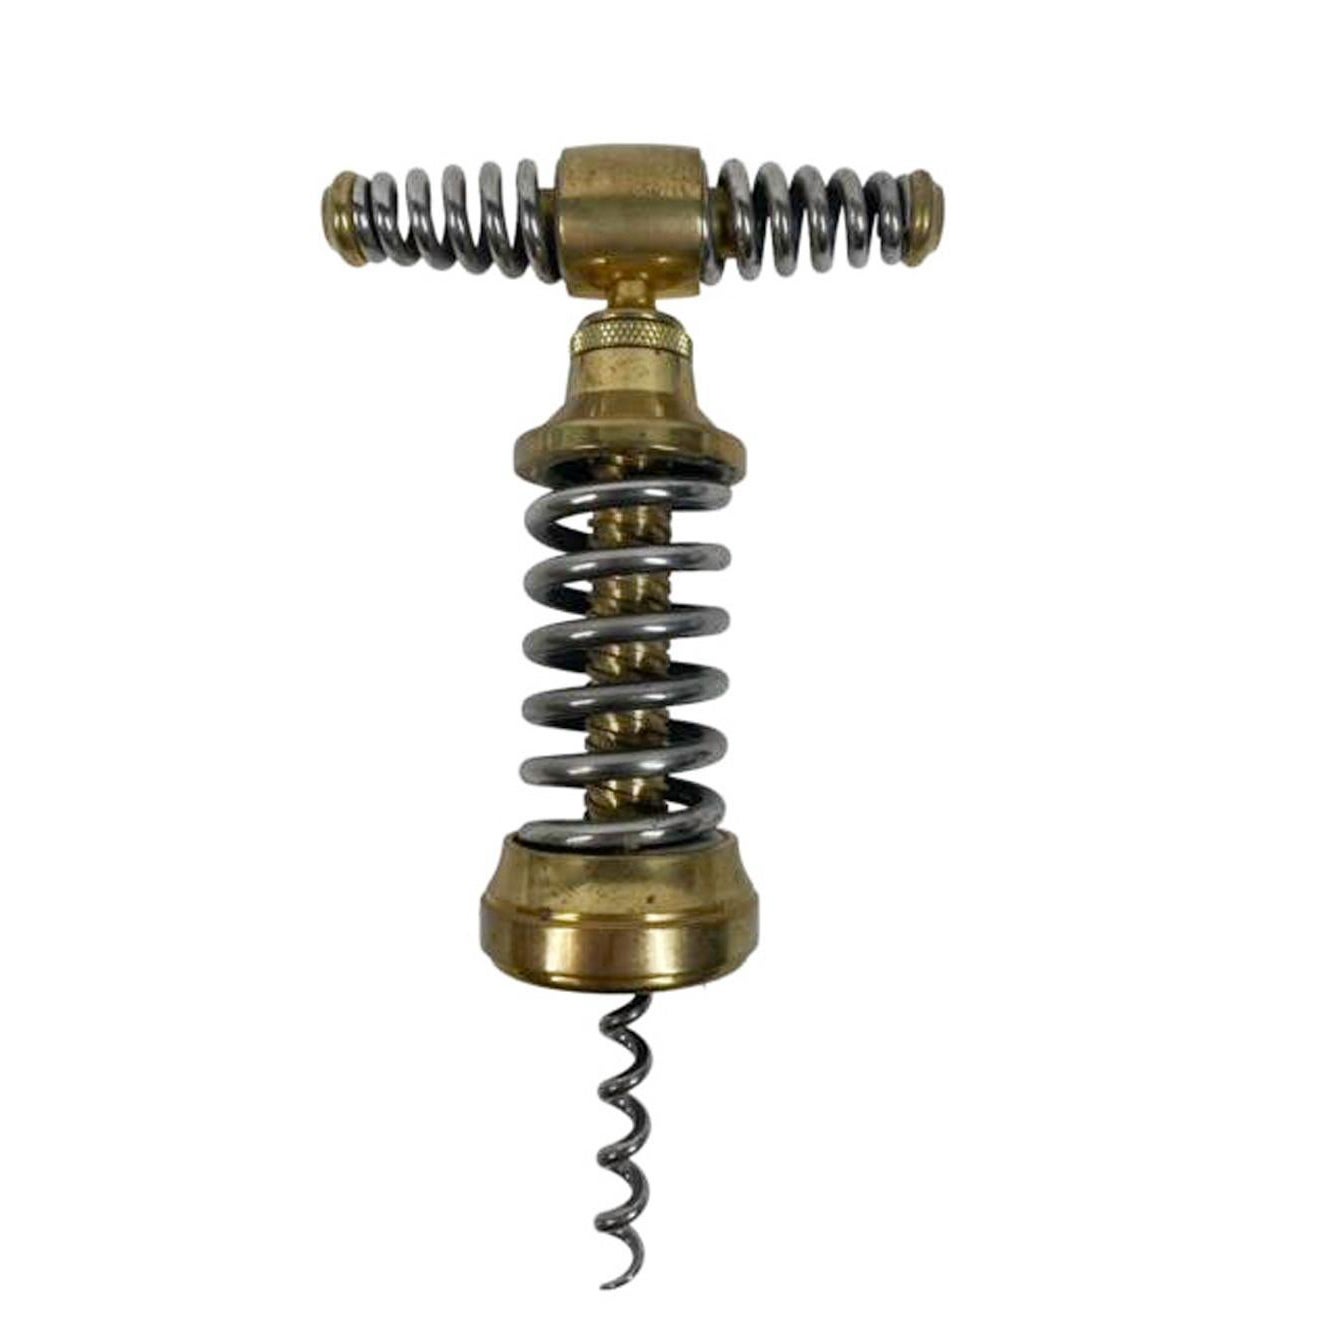 French Brass and Steel "Ressort" (Spring) Pattern Corkscrew by Peugeot For Sale